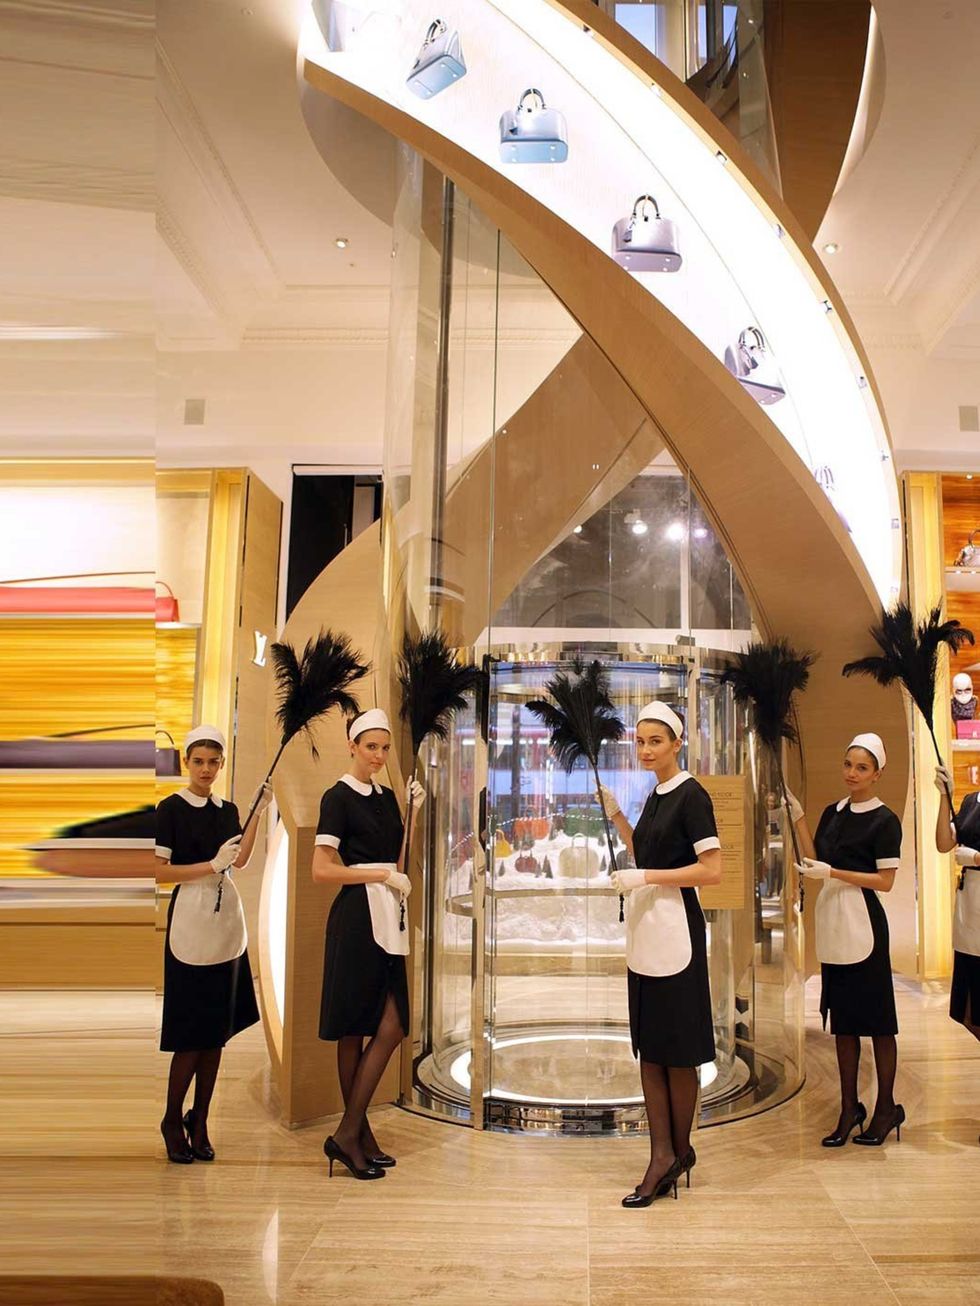 First Look: Inside the new Louis Vuitton townhouse concept at